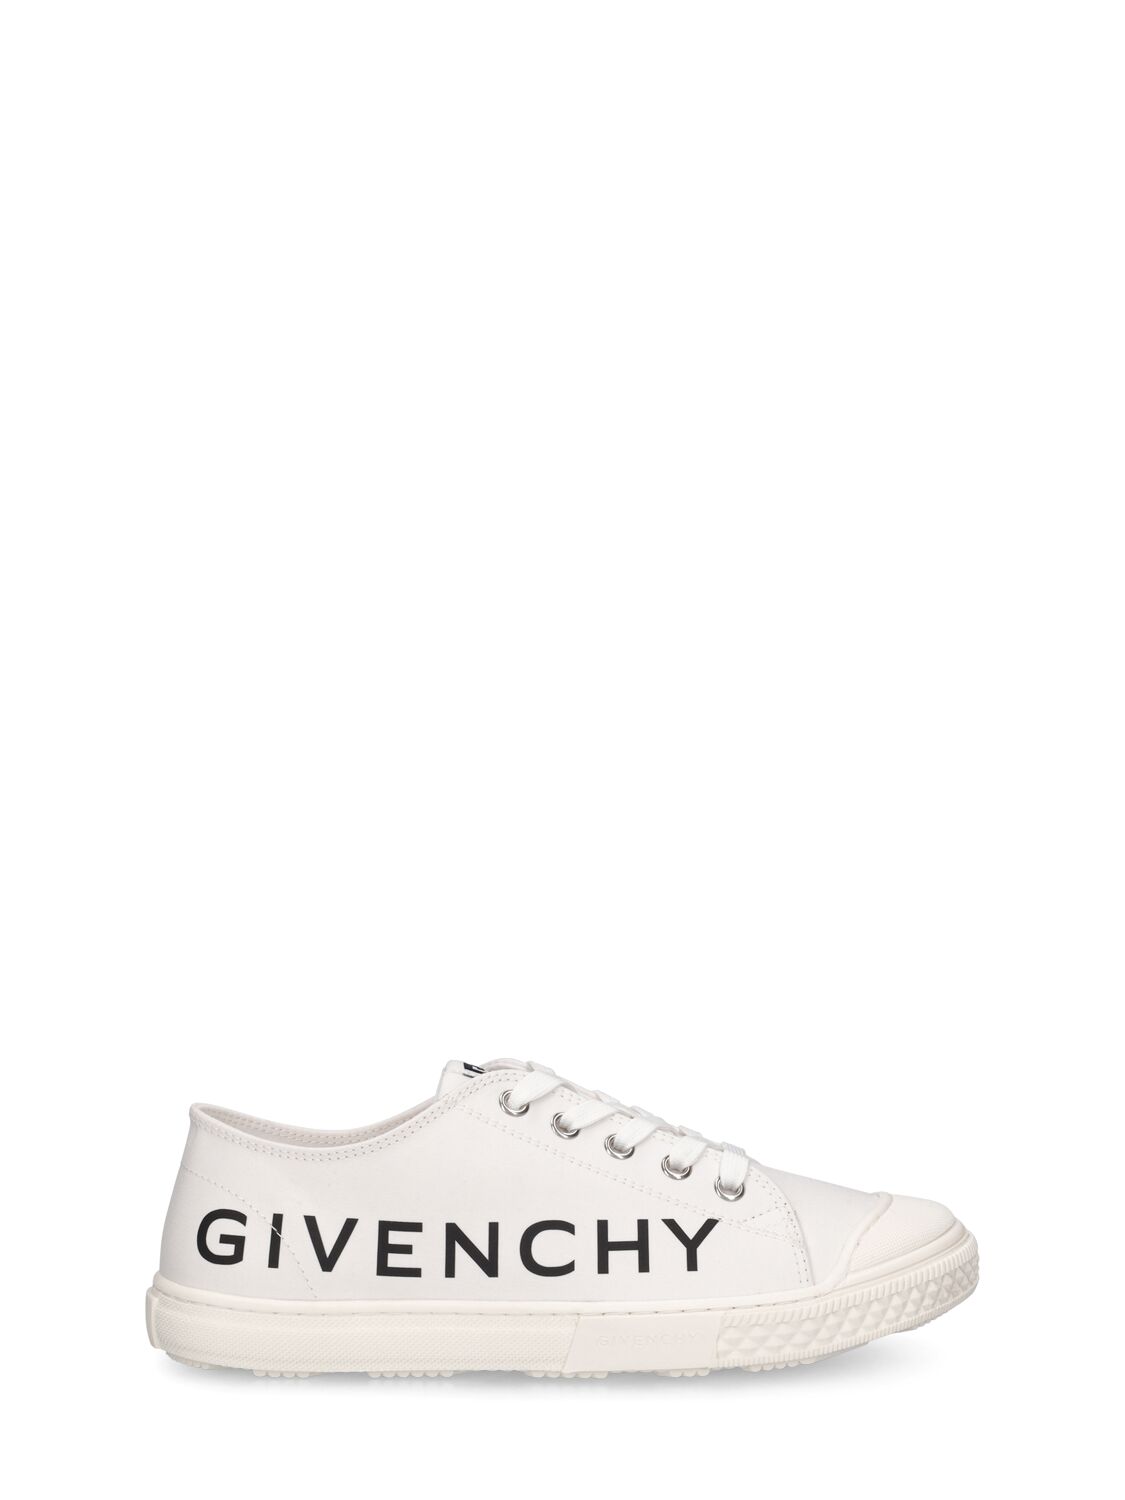 Givenchy Logo Canvas Sneakers In White